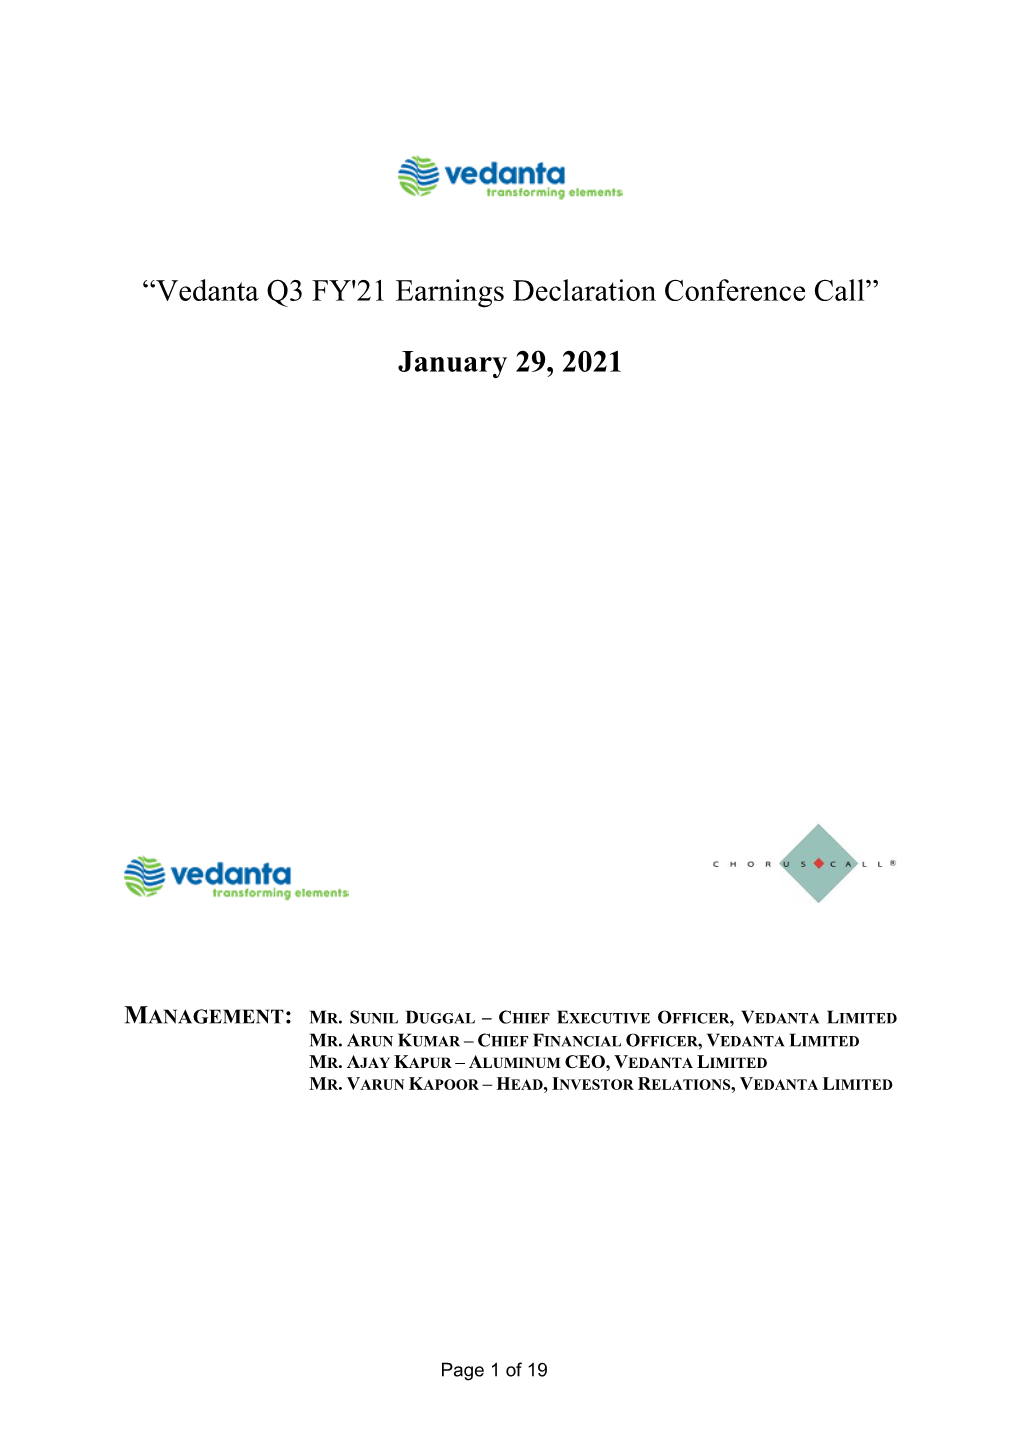 Vedanta Q3 FY'21 Earnings Declaration Conference Call”